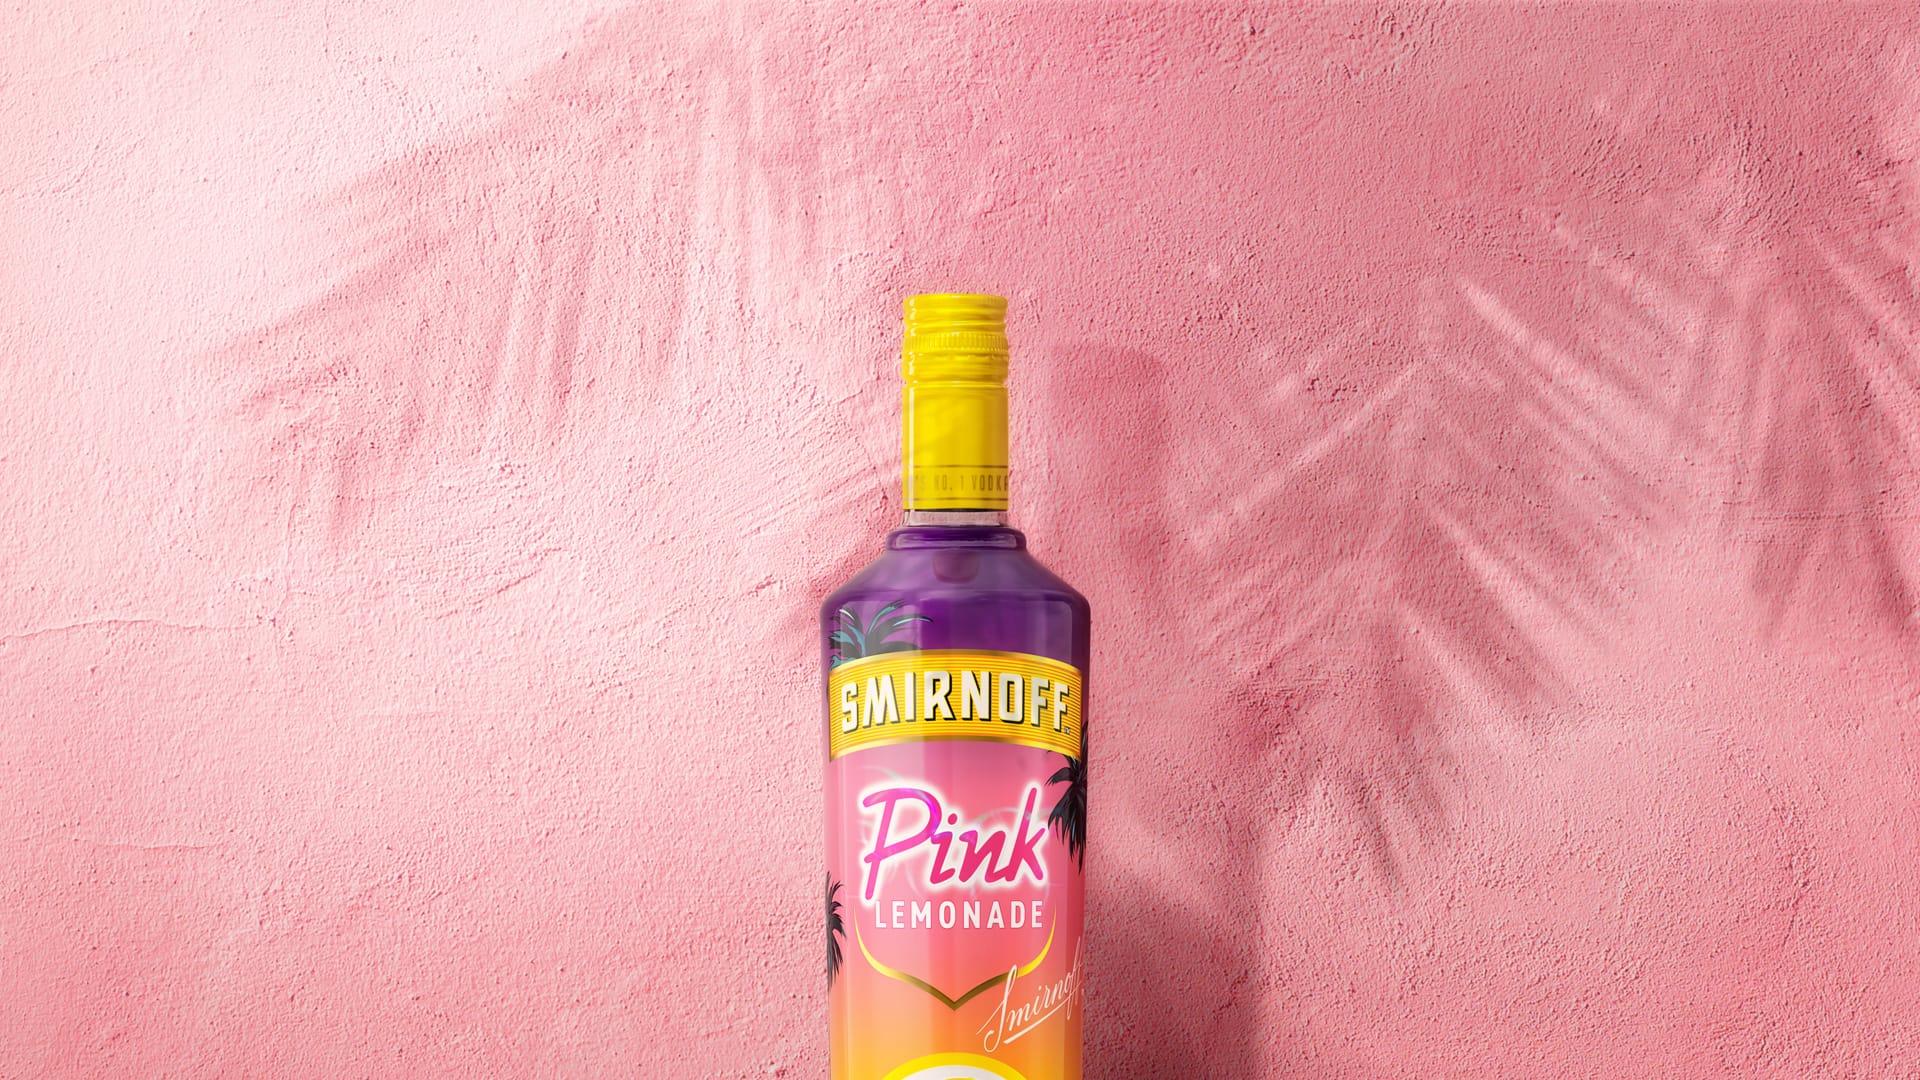 Smirnoff Pink Lemonade on pink background with palm trees